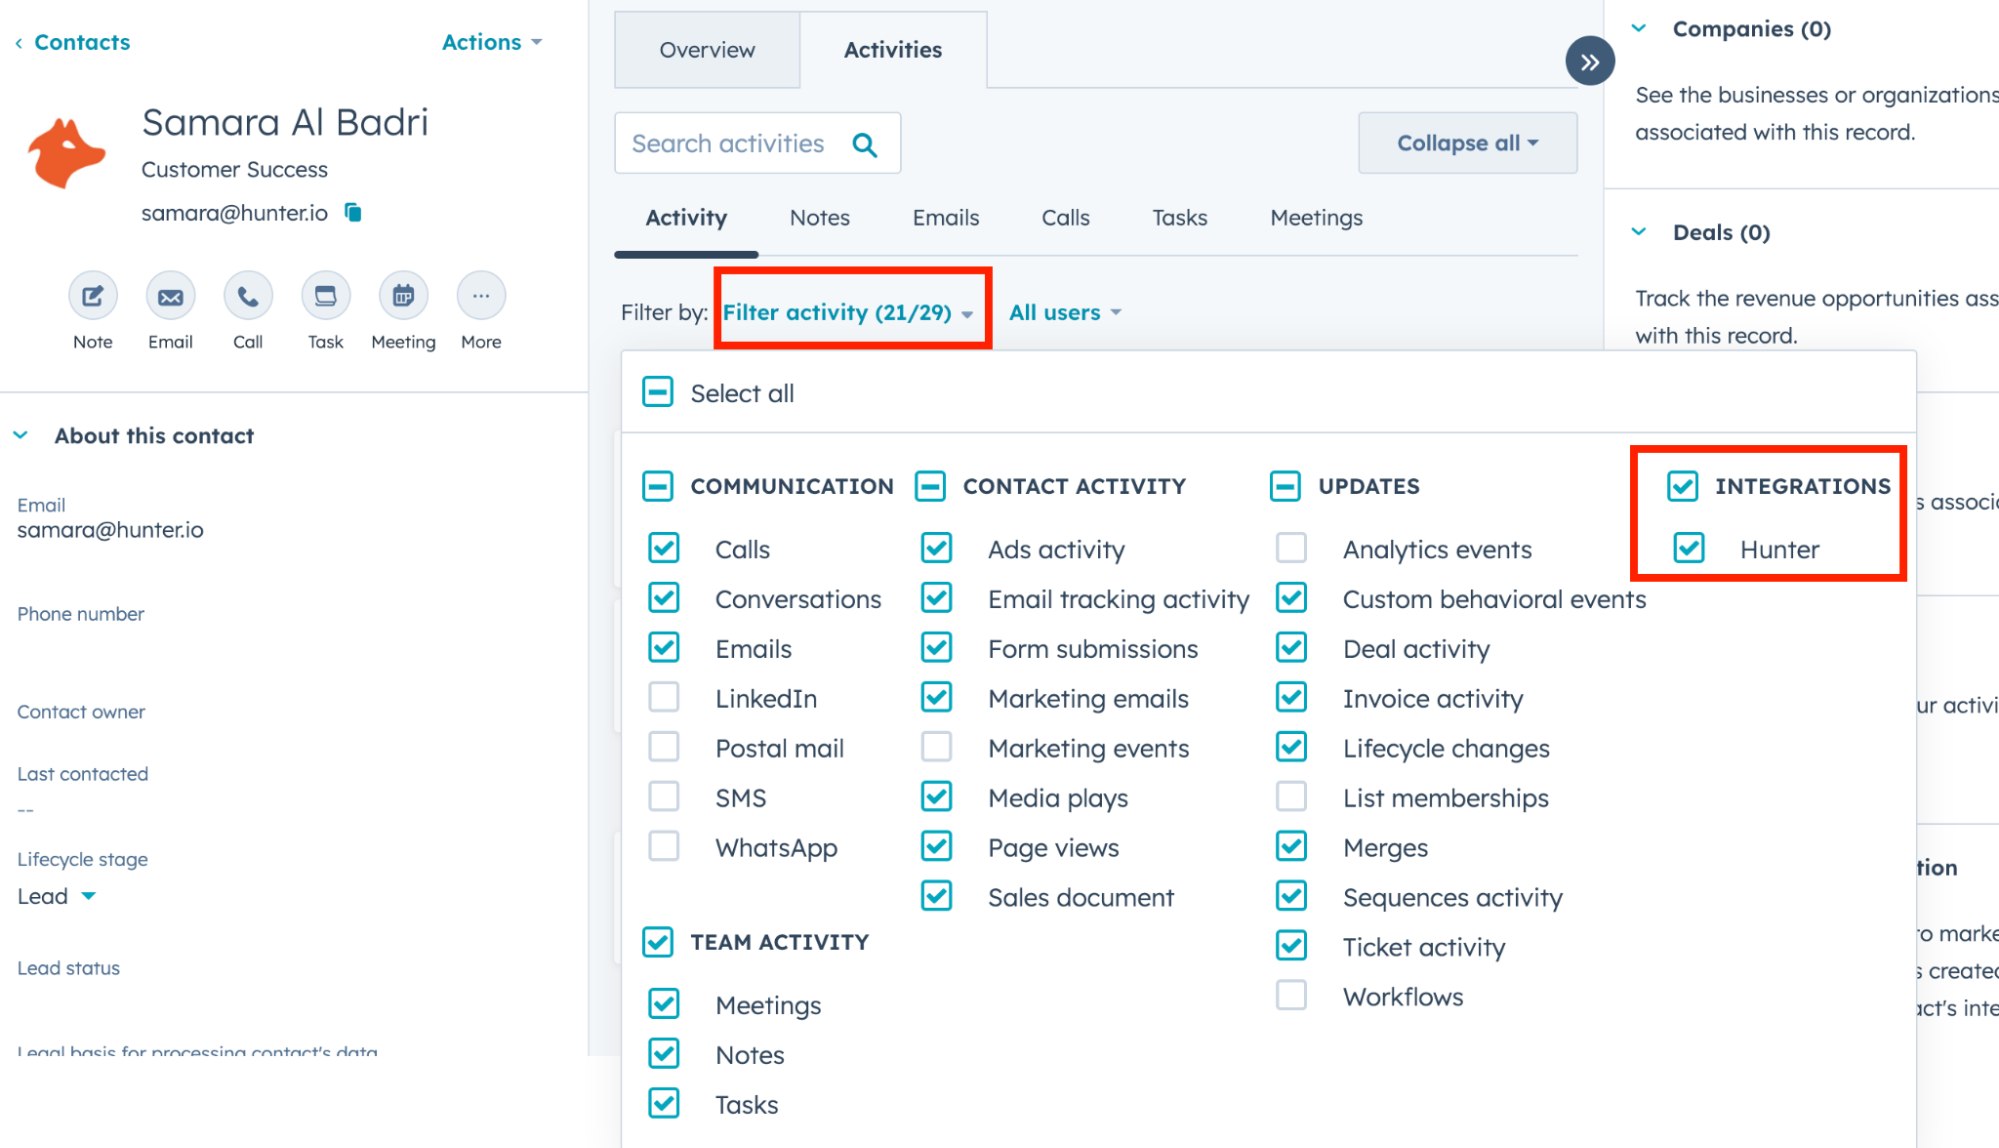 viewing leads coming from Hunter by applying an "integrations" filter in HubSpot